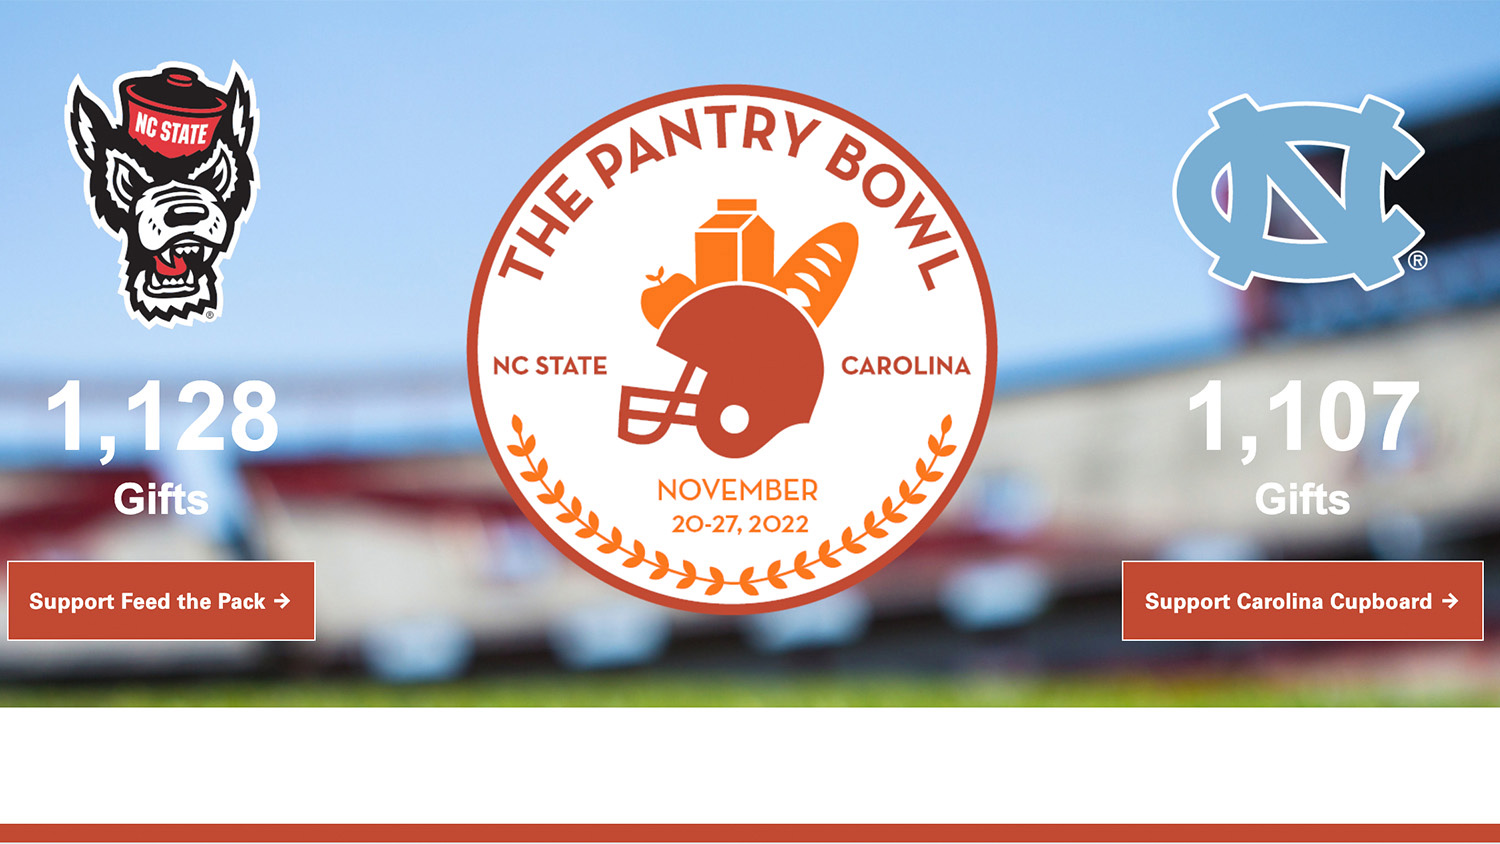 A screenshot of the Pantry Bowl website shows NC State and UNC's final gift totals in the competition.